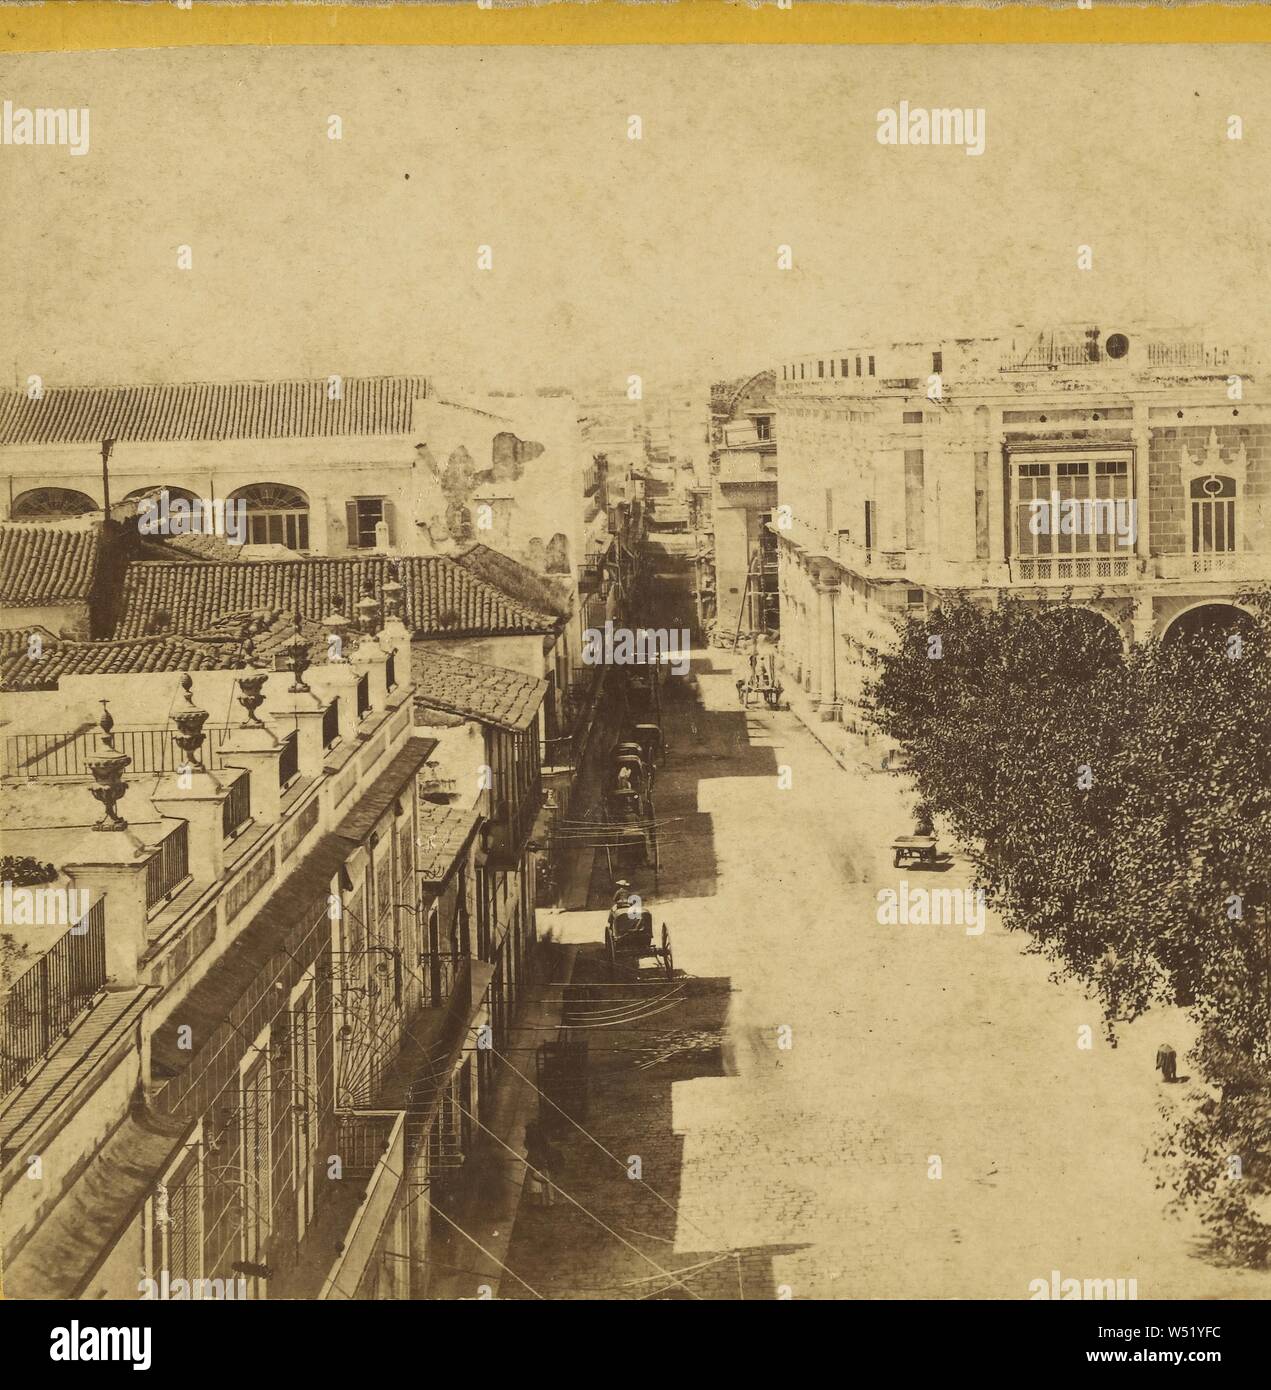 View from the Palace of the Conde de Santovenia, looking up the Calle de Obispo. Havana., George N. Barnard (American, 1819 - 1902), Edward and Henry T. Anthony & Co. (American, 1862 - 1902), Negative printed by Kuhns, about 1860–1862, Albumen silver print Stock Photo